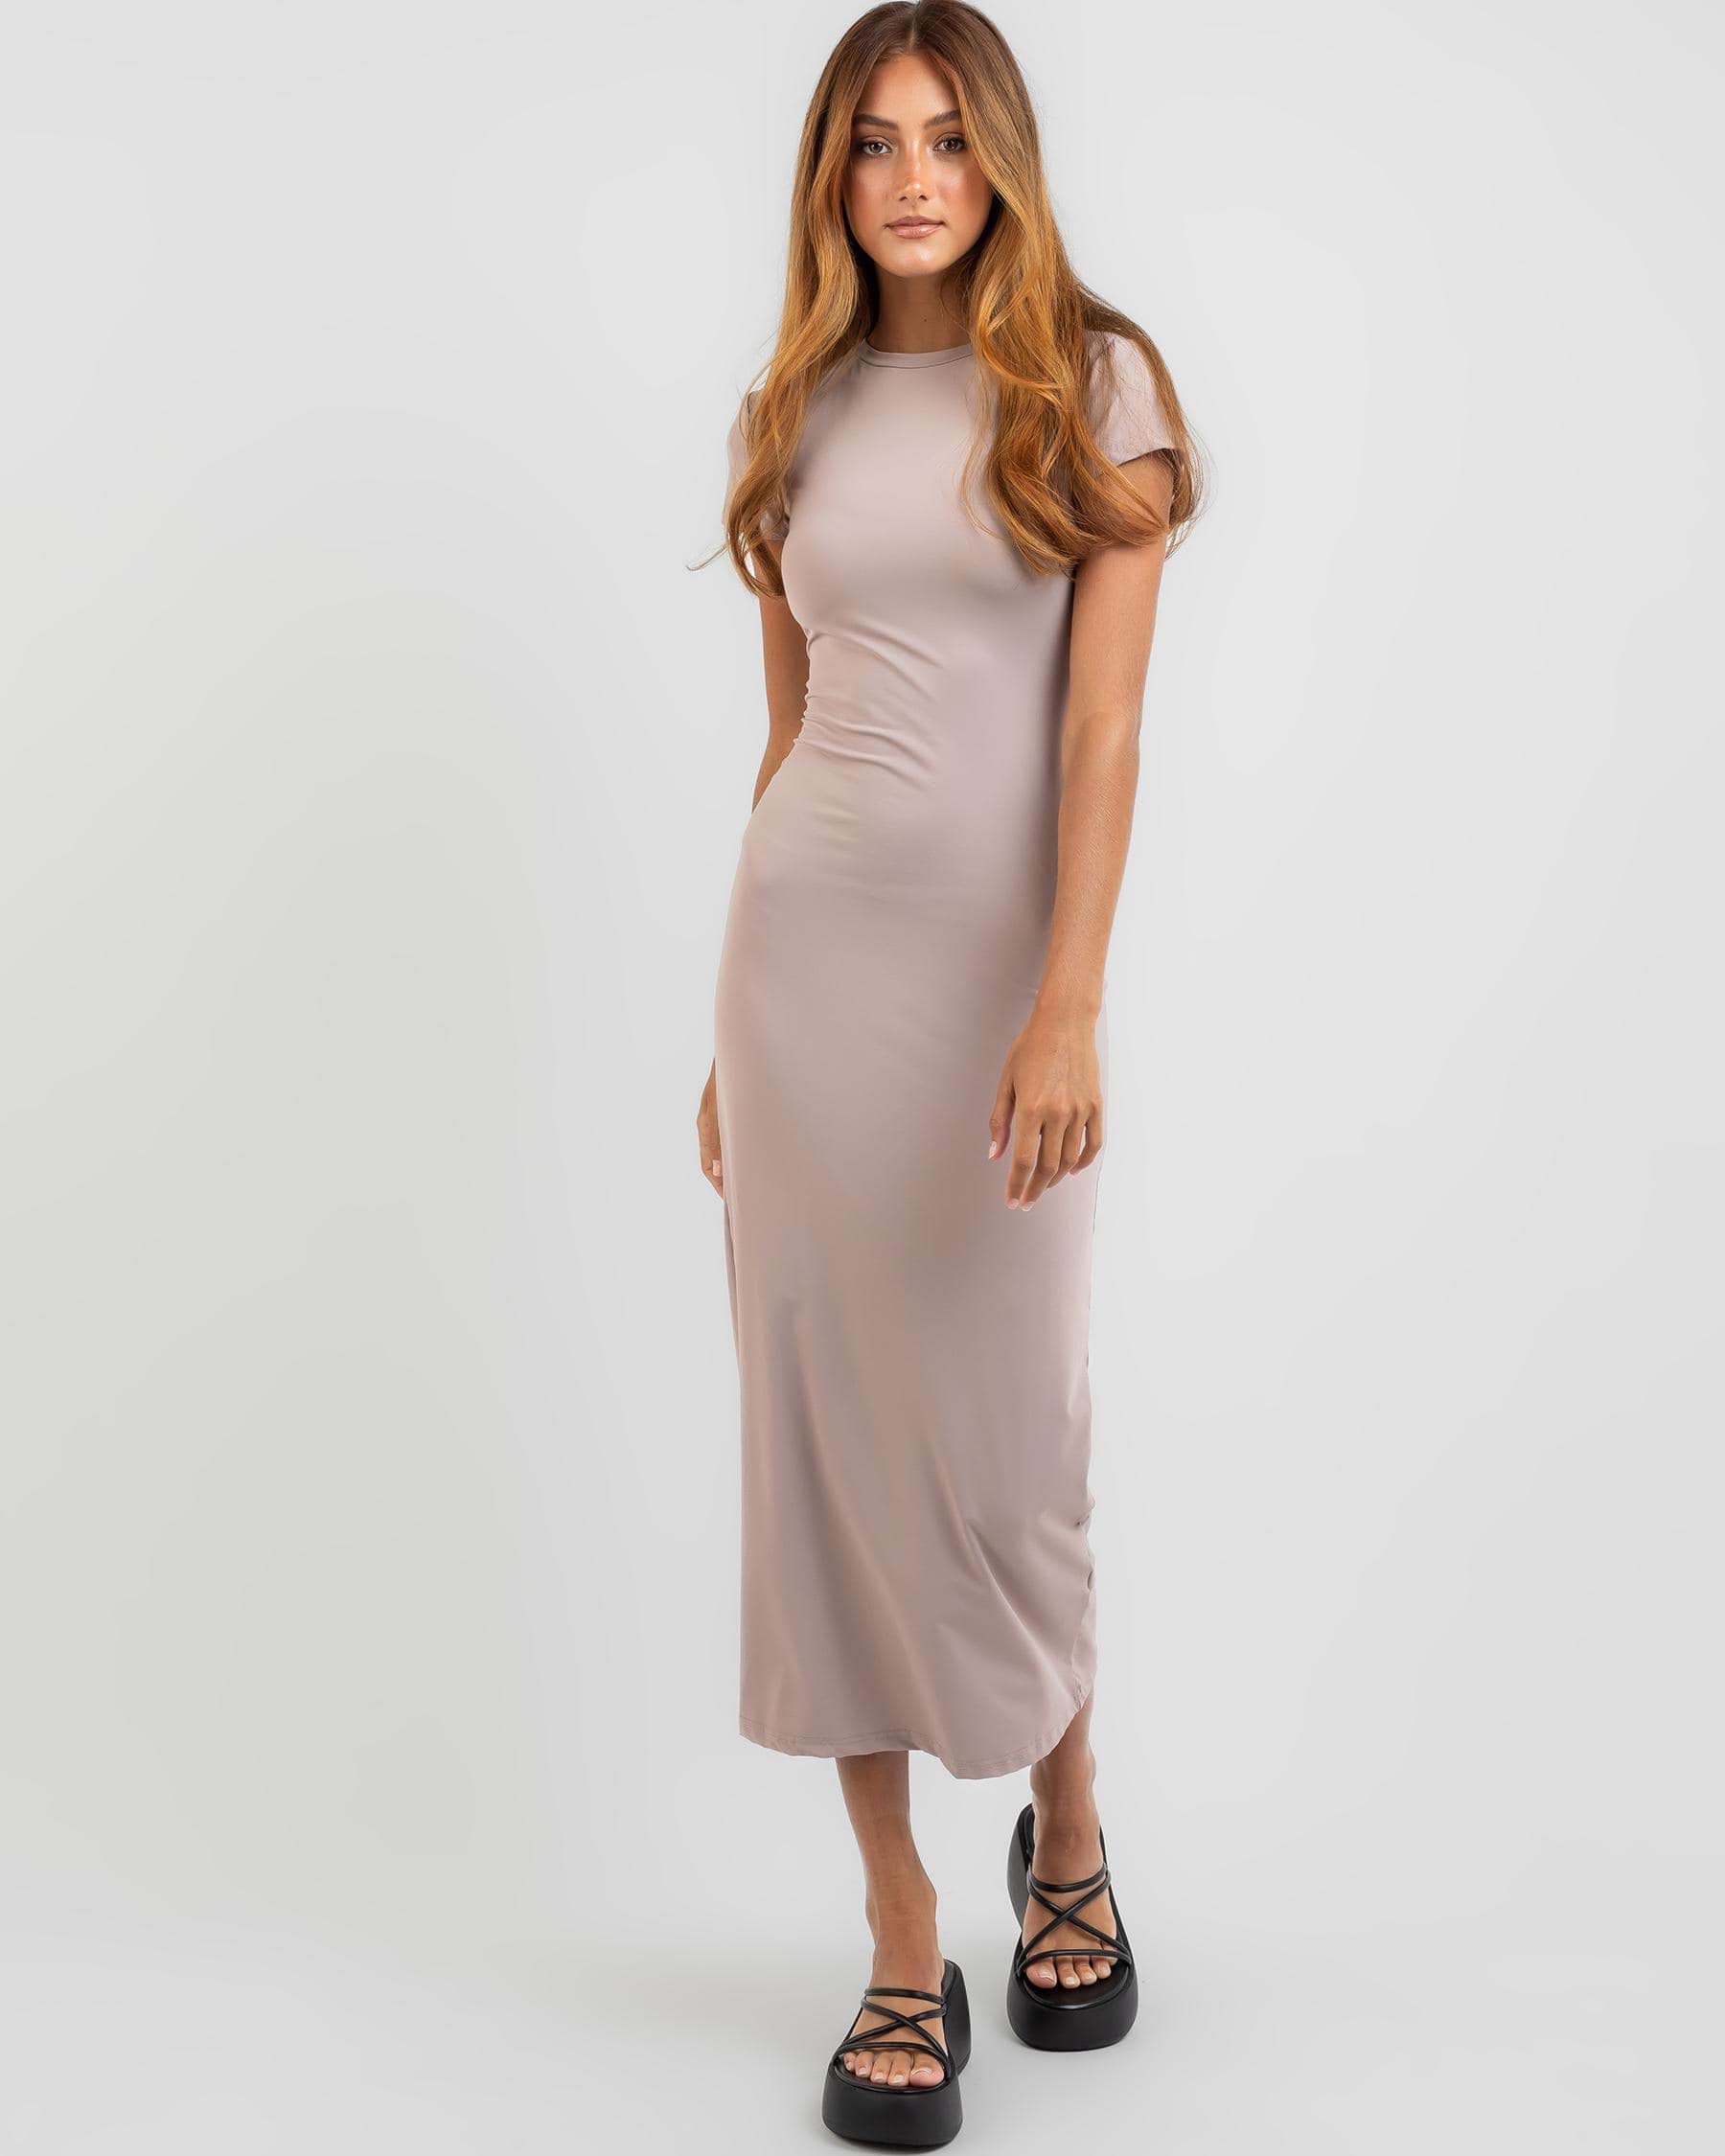 Shop Ava And Ever Ethan Midi Dress In Mauve - Fast Shipping & Easy ...